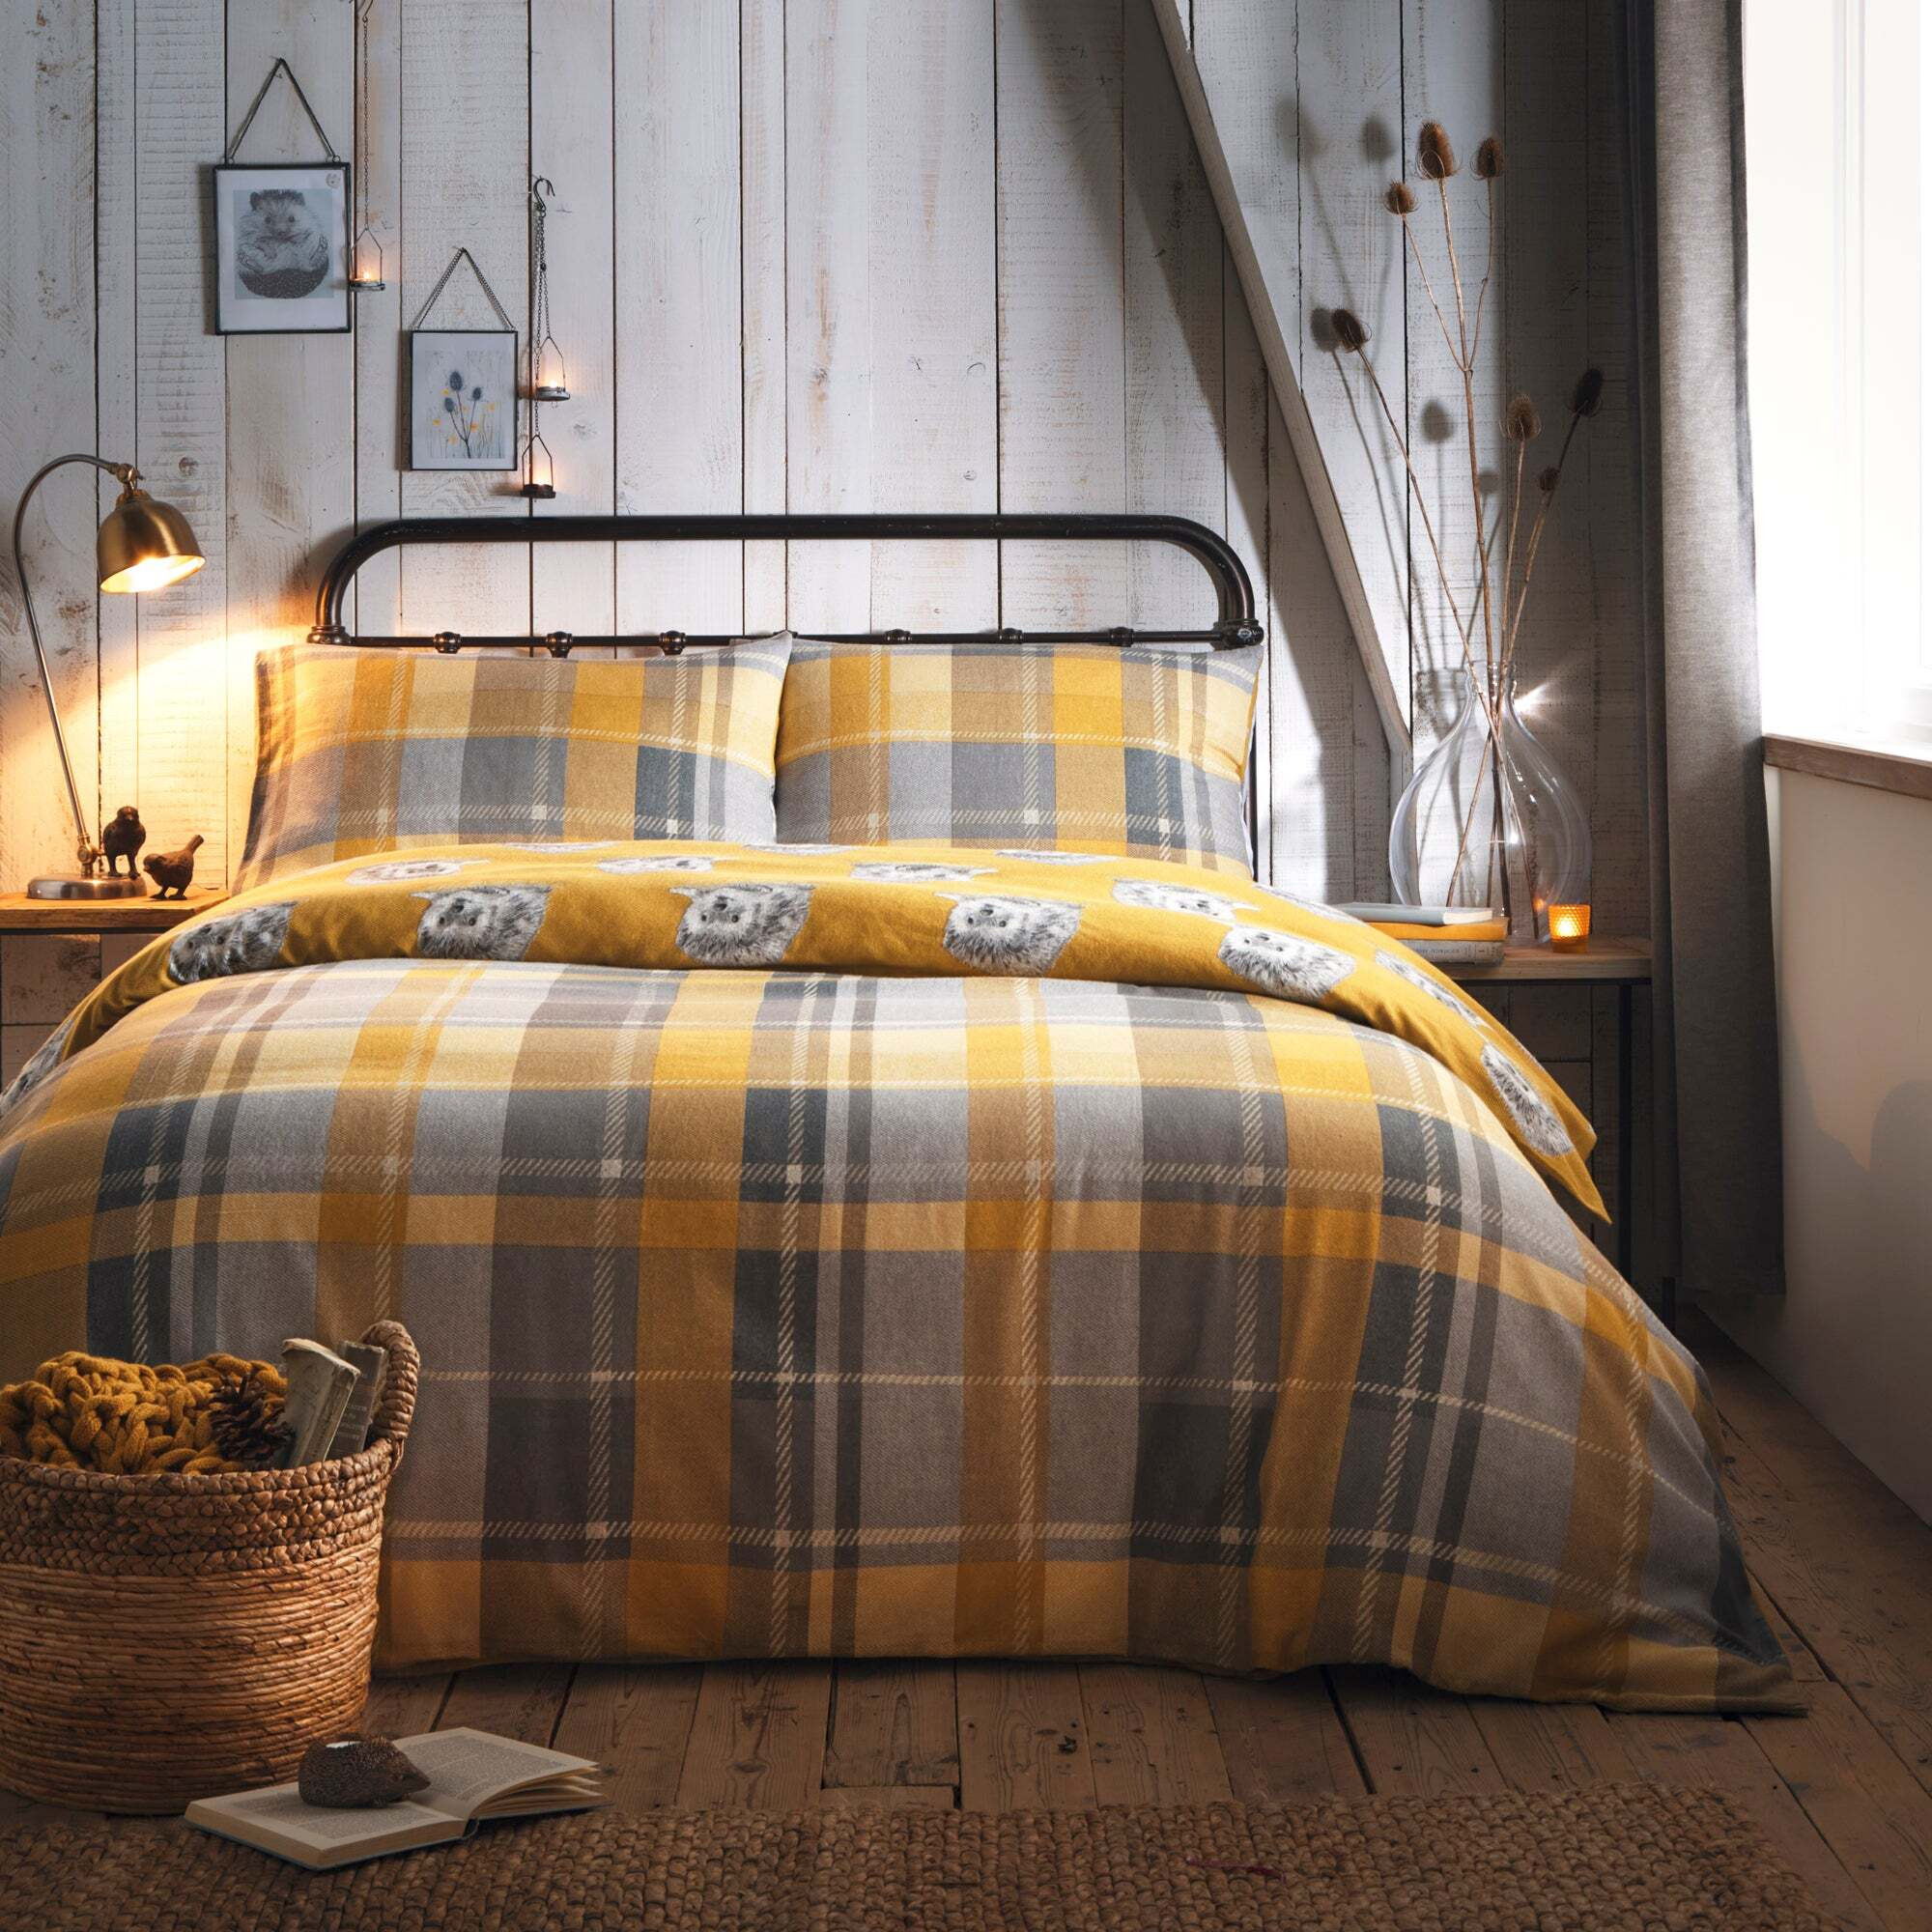 Colville Yellow Checked 100% Brushed Cotton Duvet Cover and Pillowcase Set Yellow, Grey and White